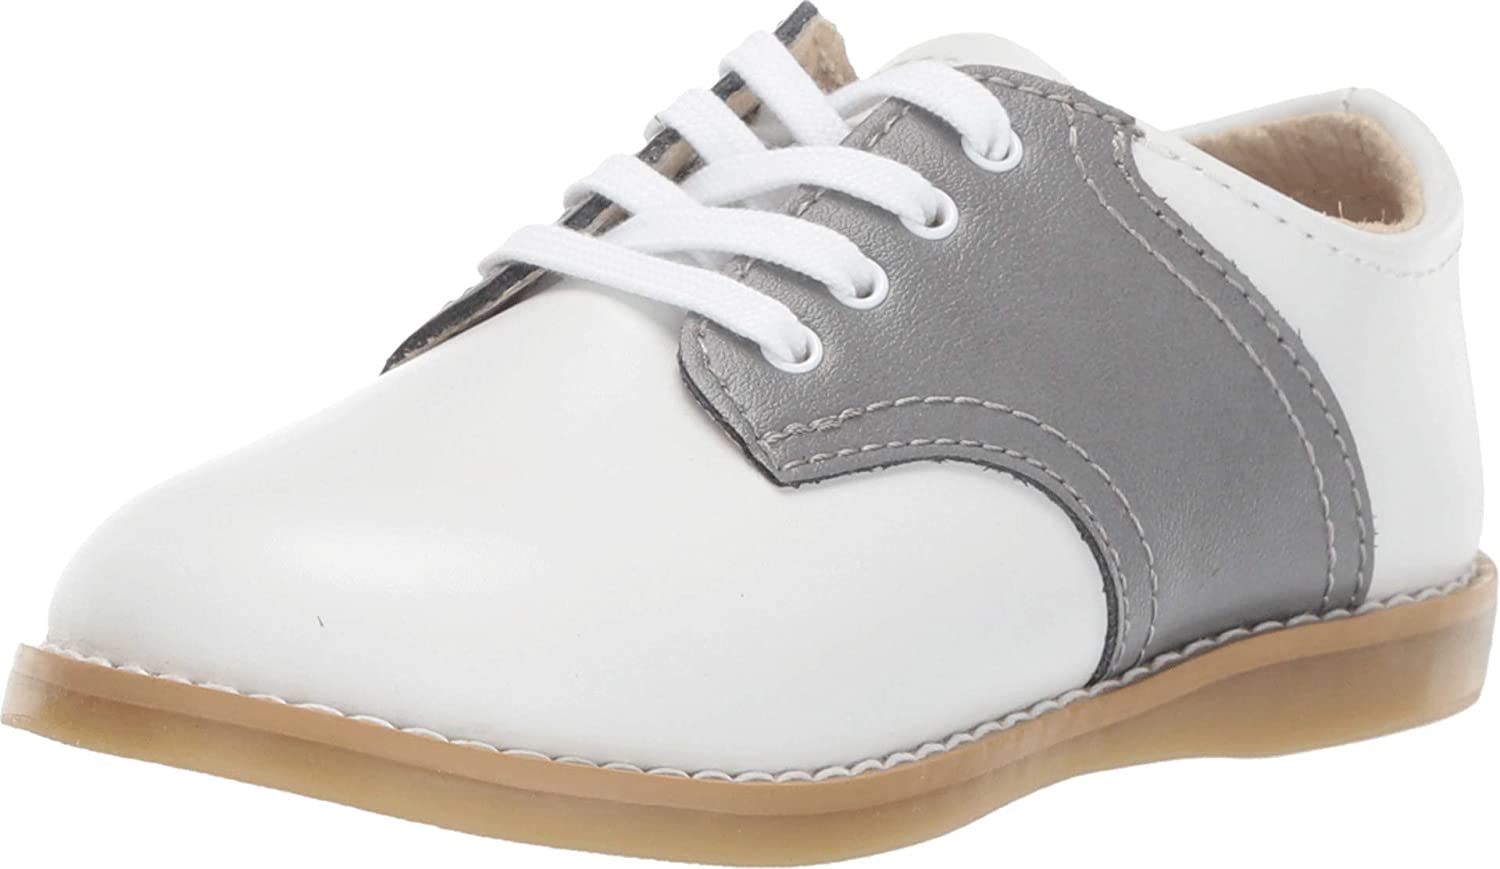 Footmates Cheer Toddler Shoe (age 2-4 years) in White/Gray view from the front